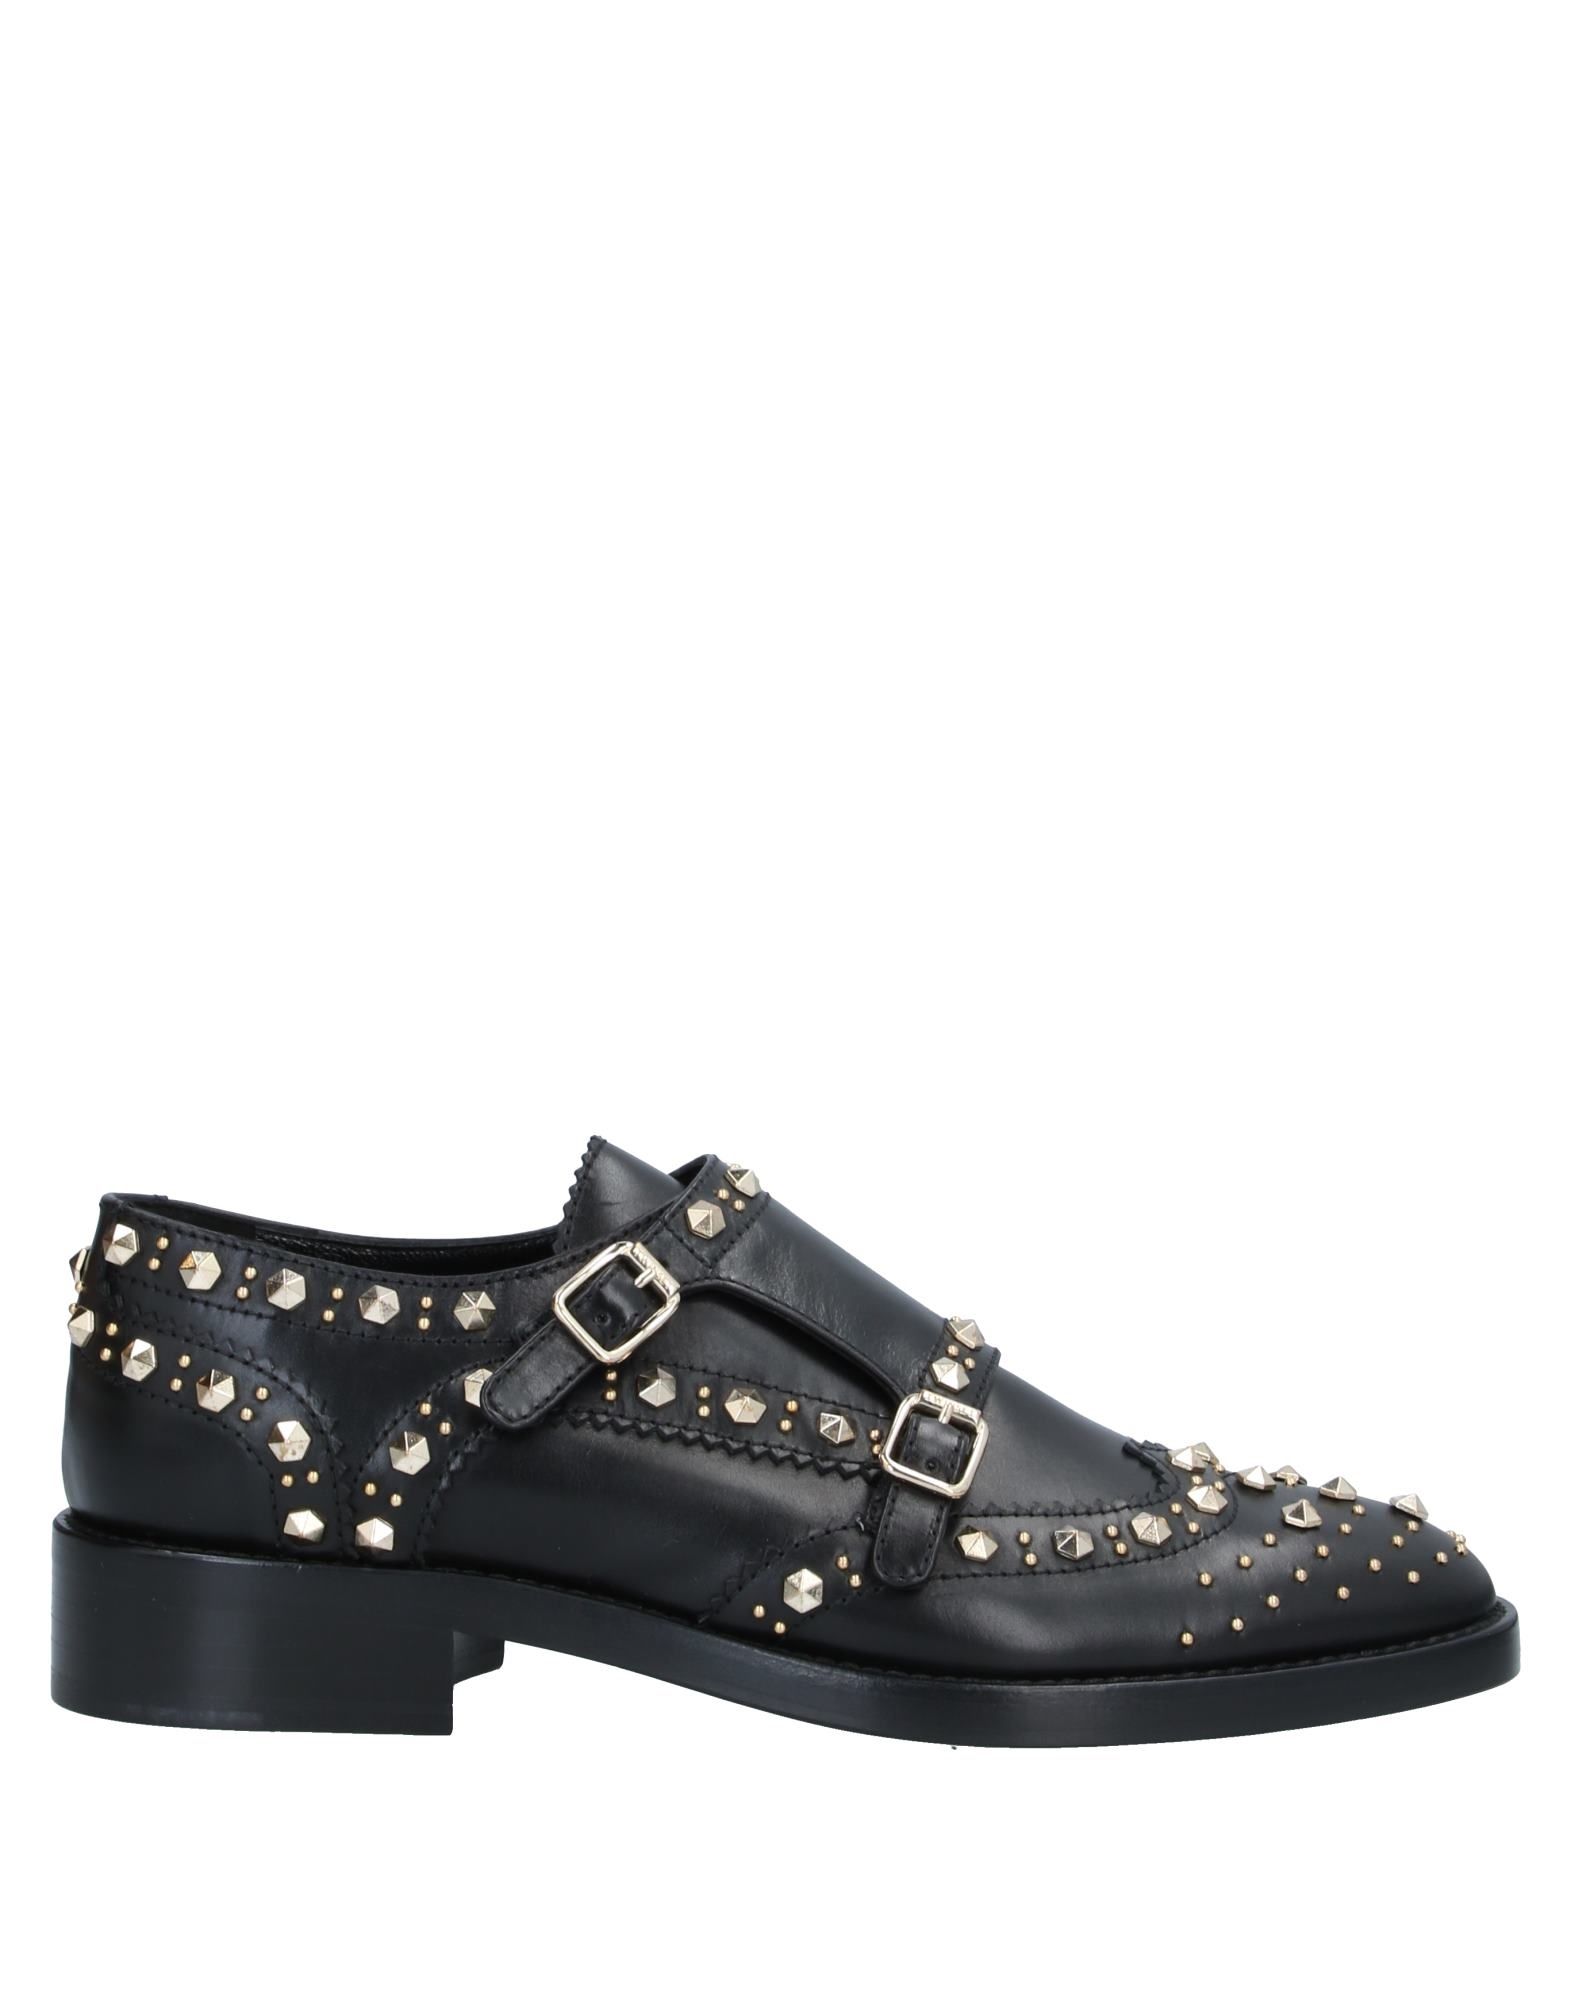 TWINSET Loafers